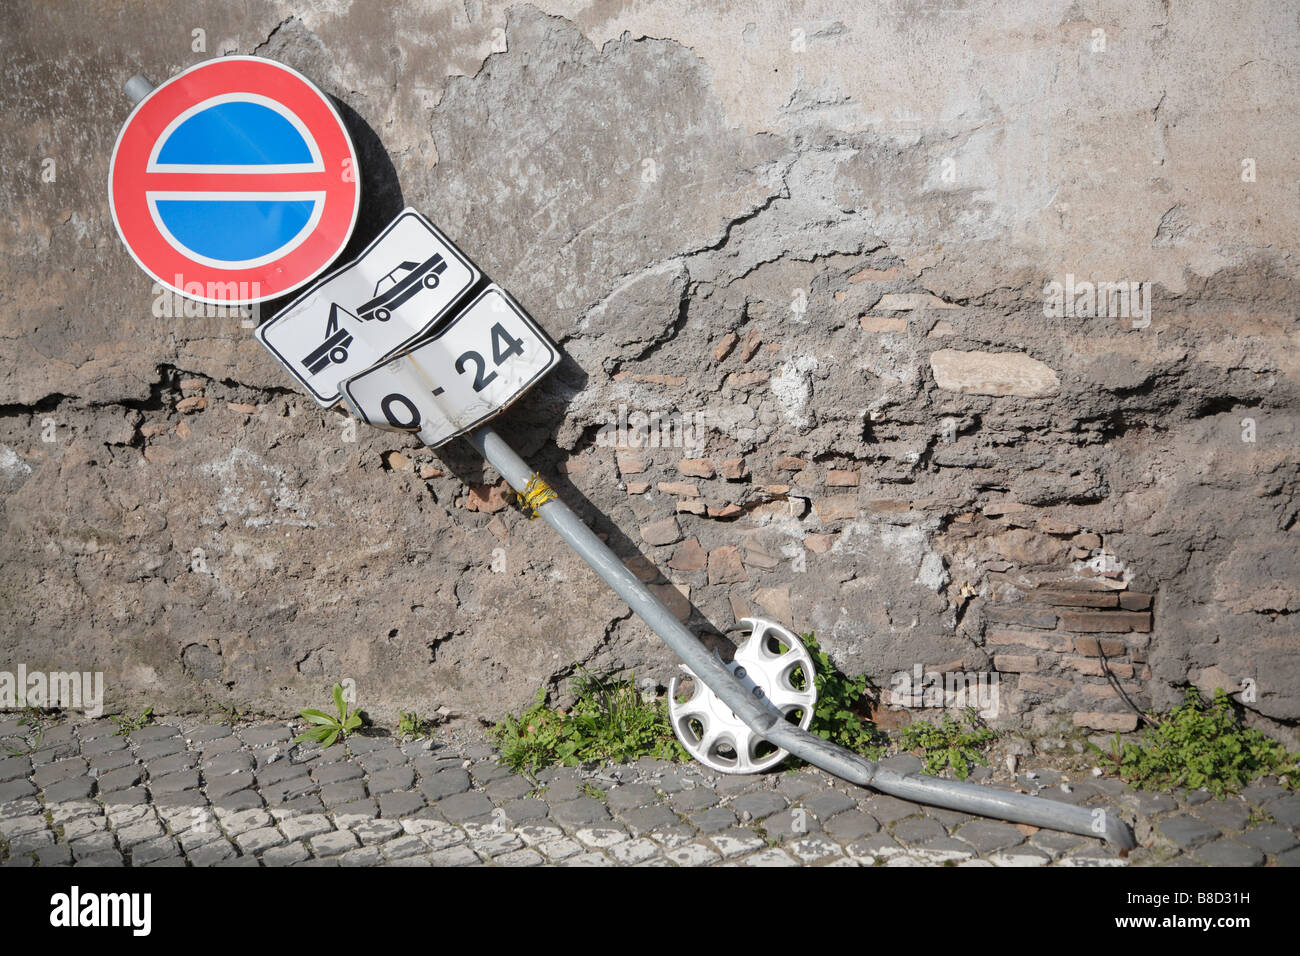 Road sign crashed by a car, Rome, Italy Stock Photo